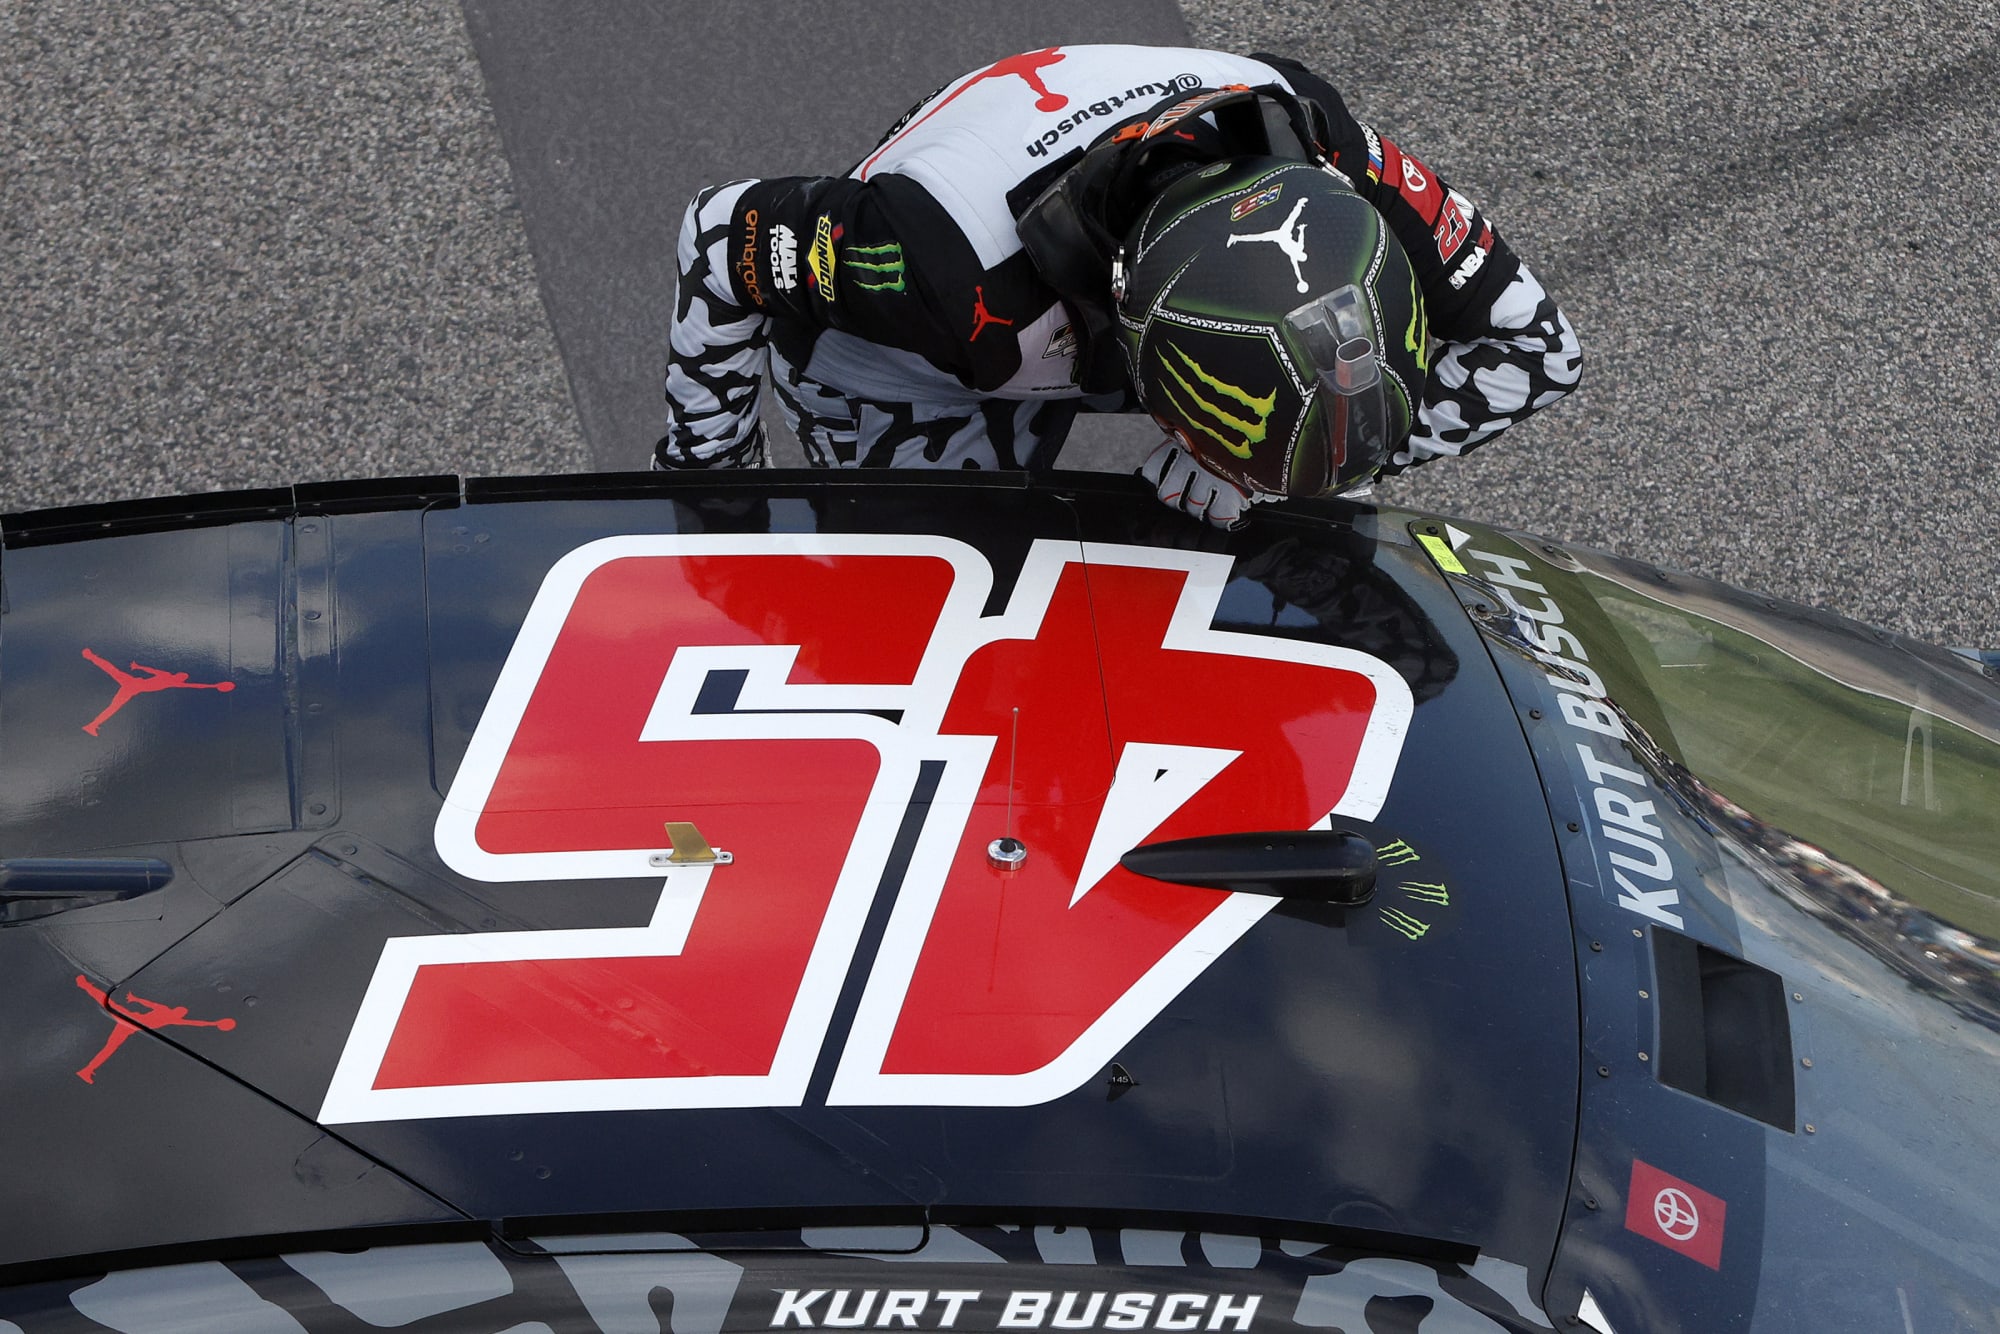 NASCAR: The 58-year drought that Kurt Busch ended